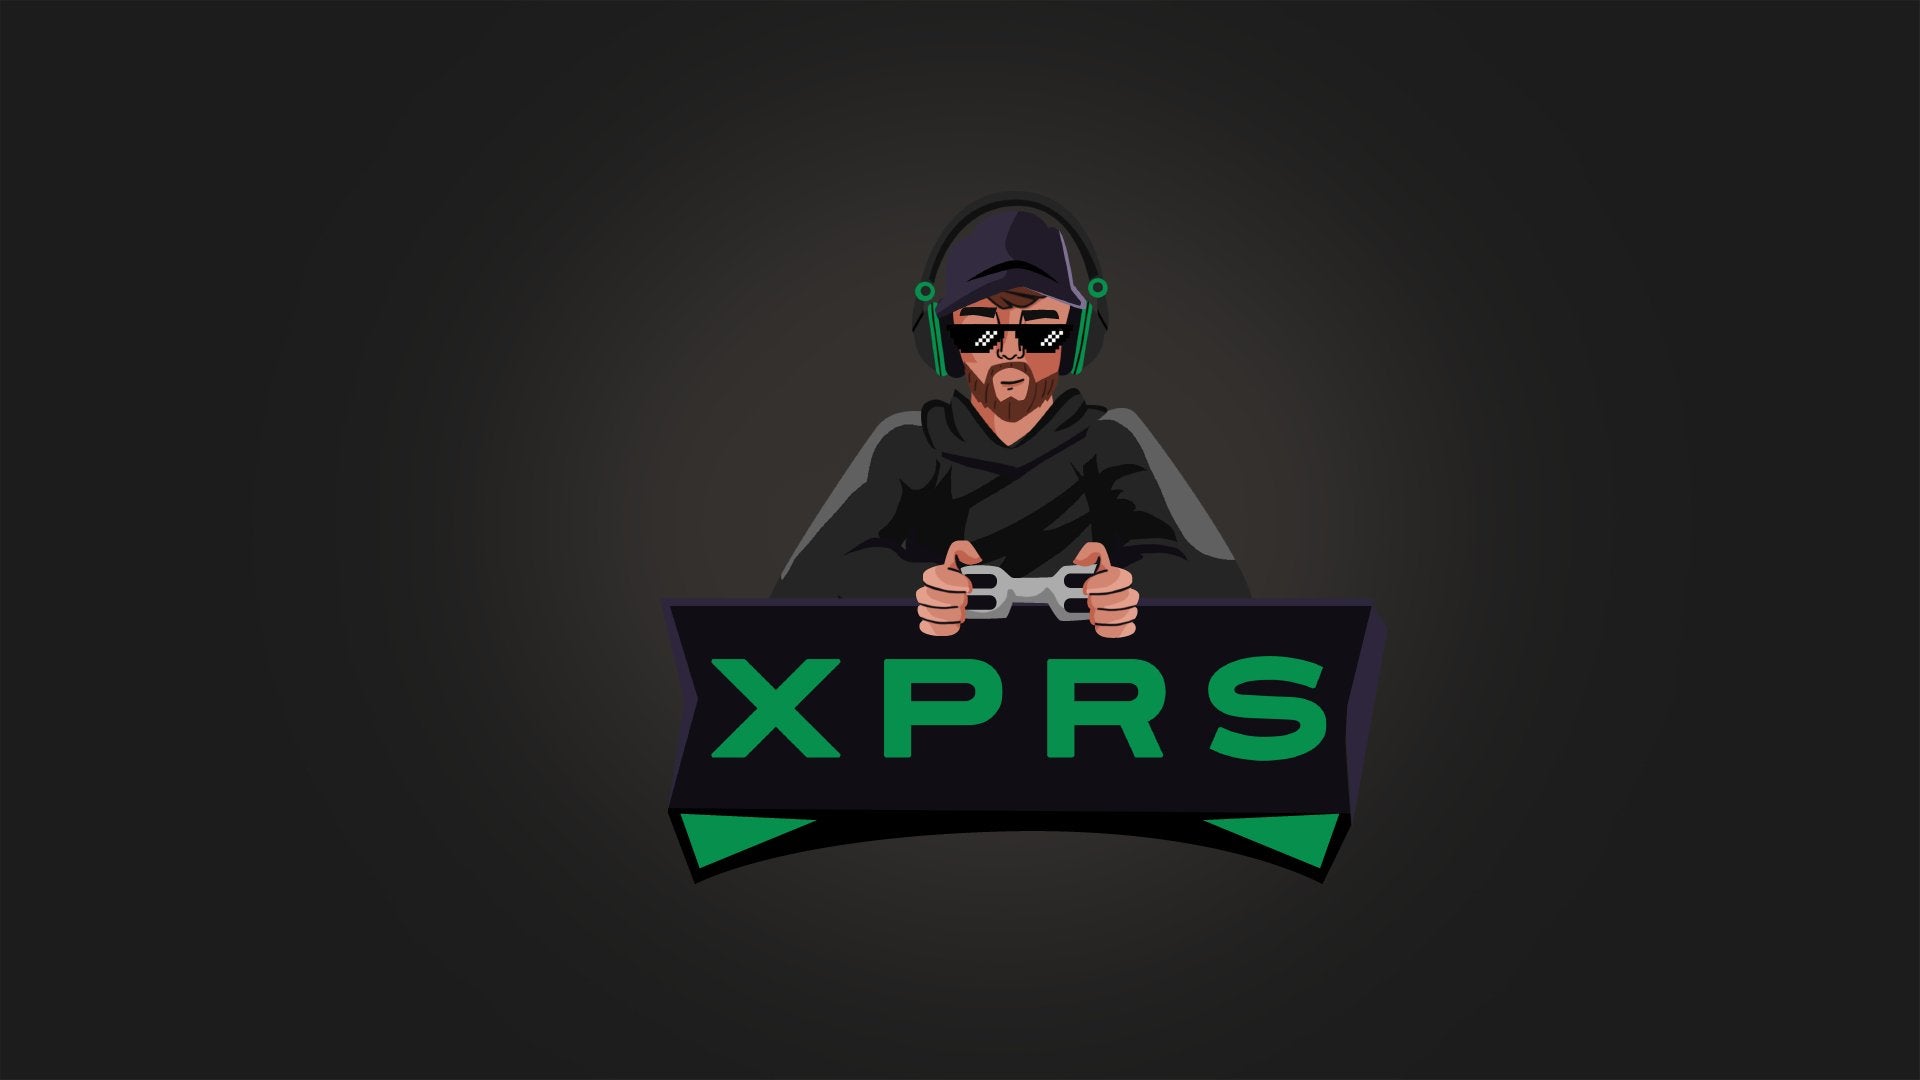 Why XPRS Is Your New Gaming Destination - XPRS